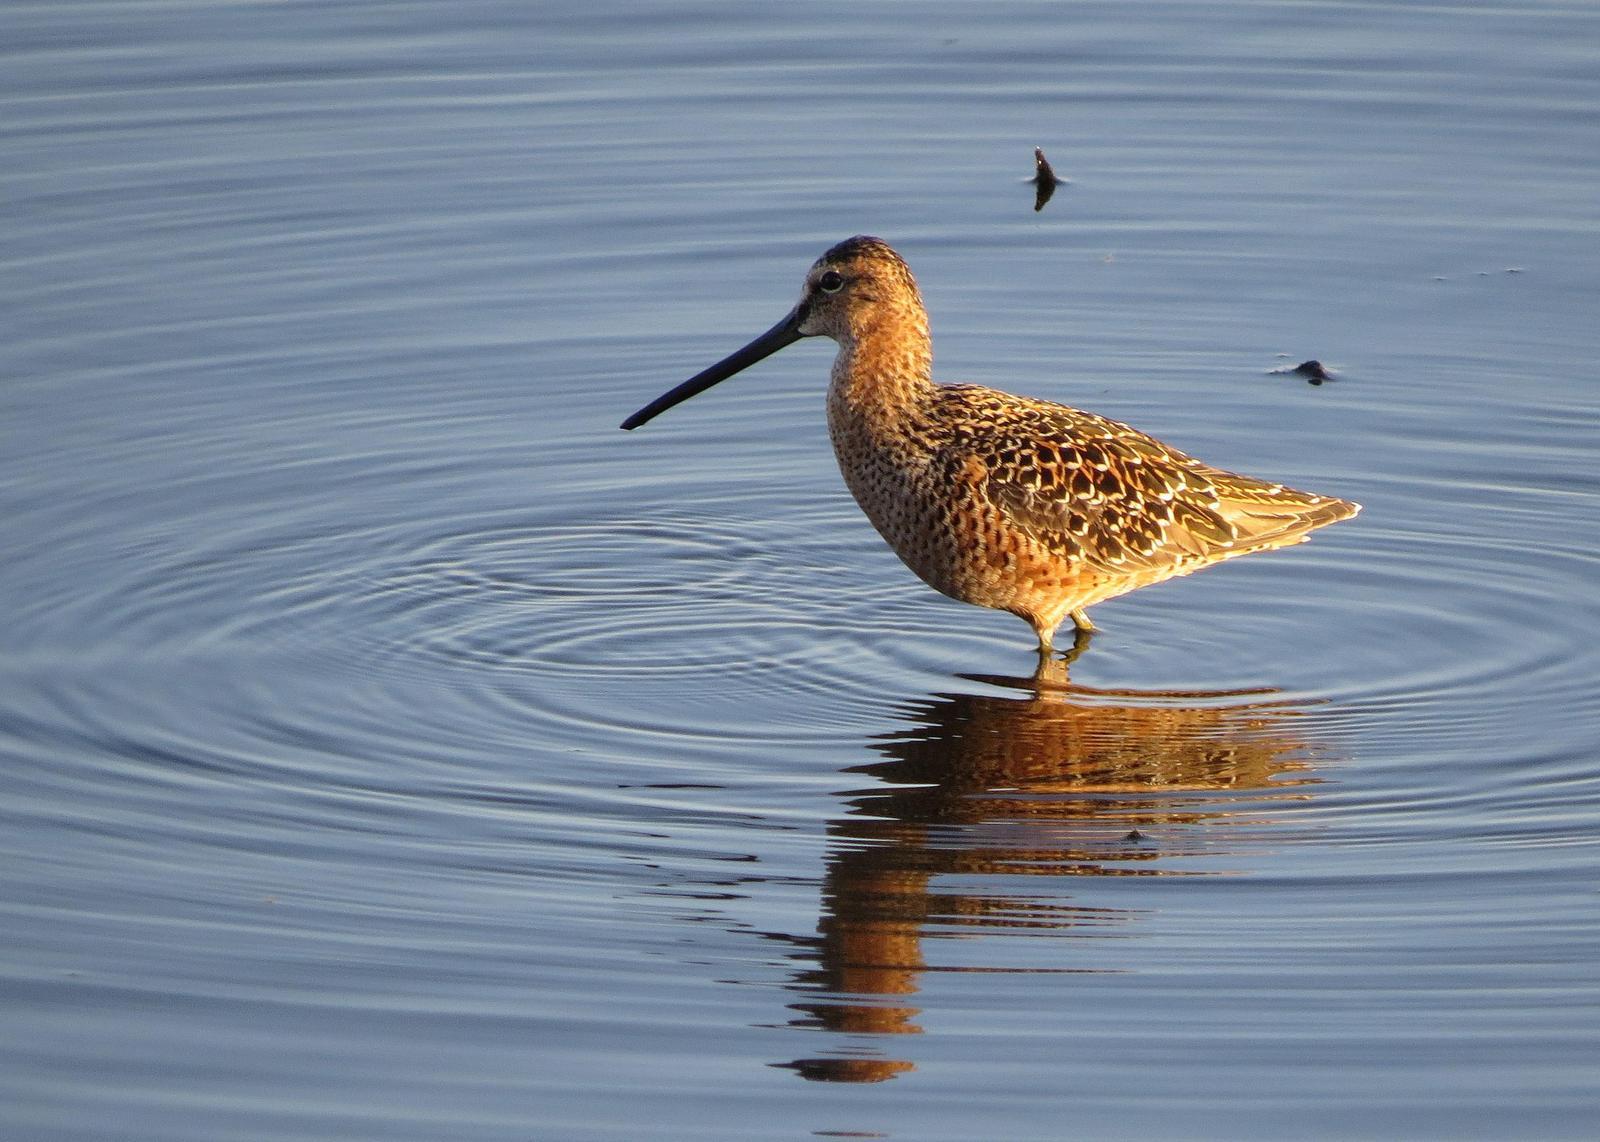 Long-billed Dowitcher Photo by Kelly Preheim